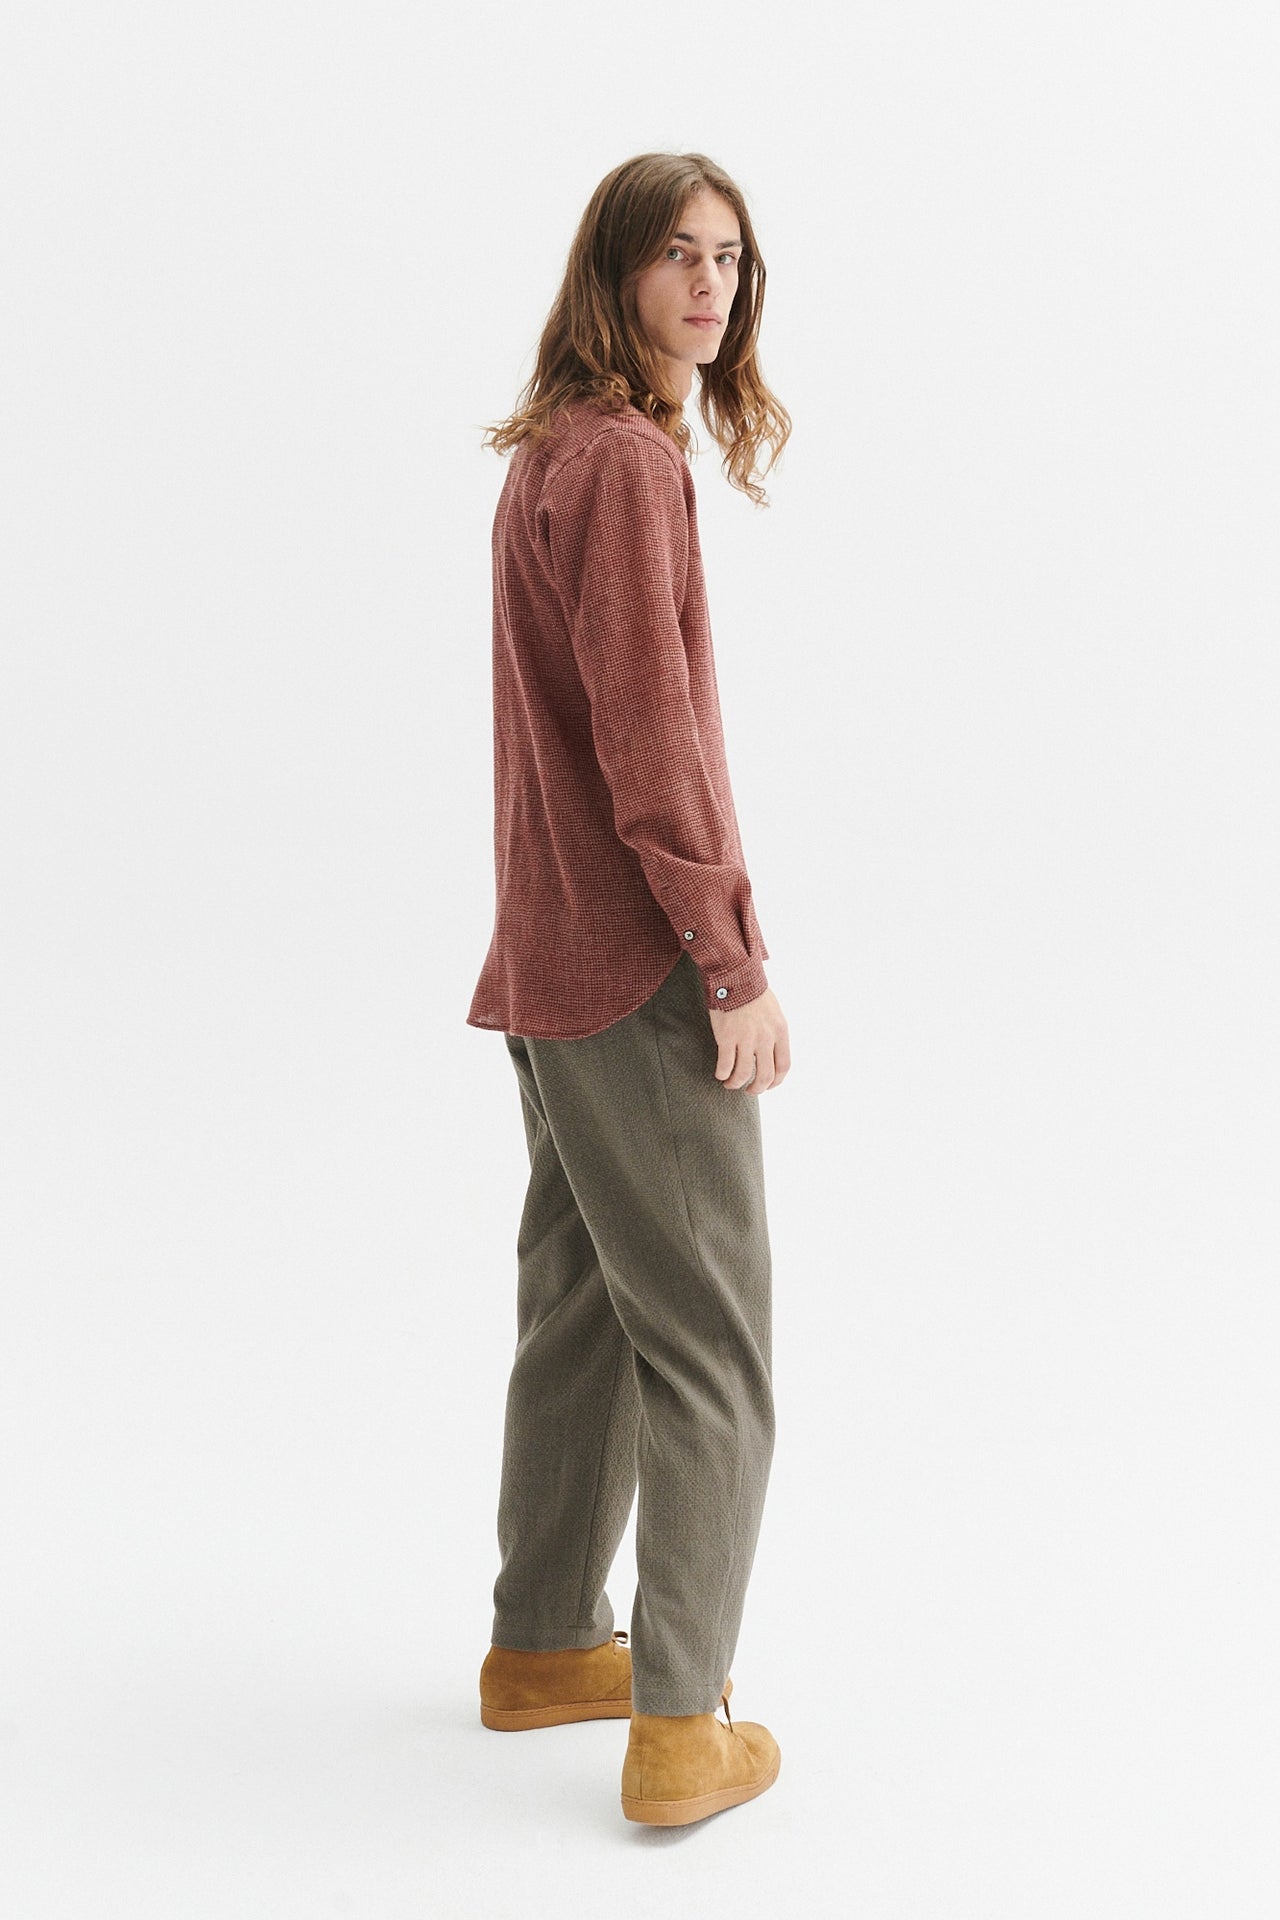 Zen Grandad Collar Shirt in the Japanese Pure Virgin Wool with Red and Yellow Houndstooth Pattern